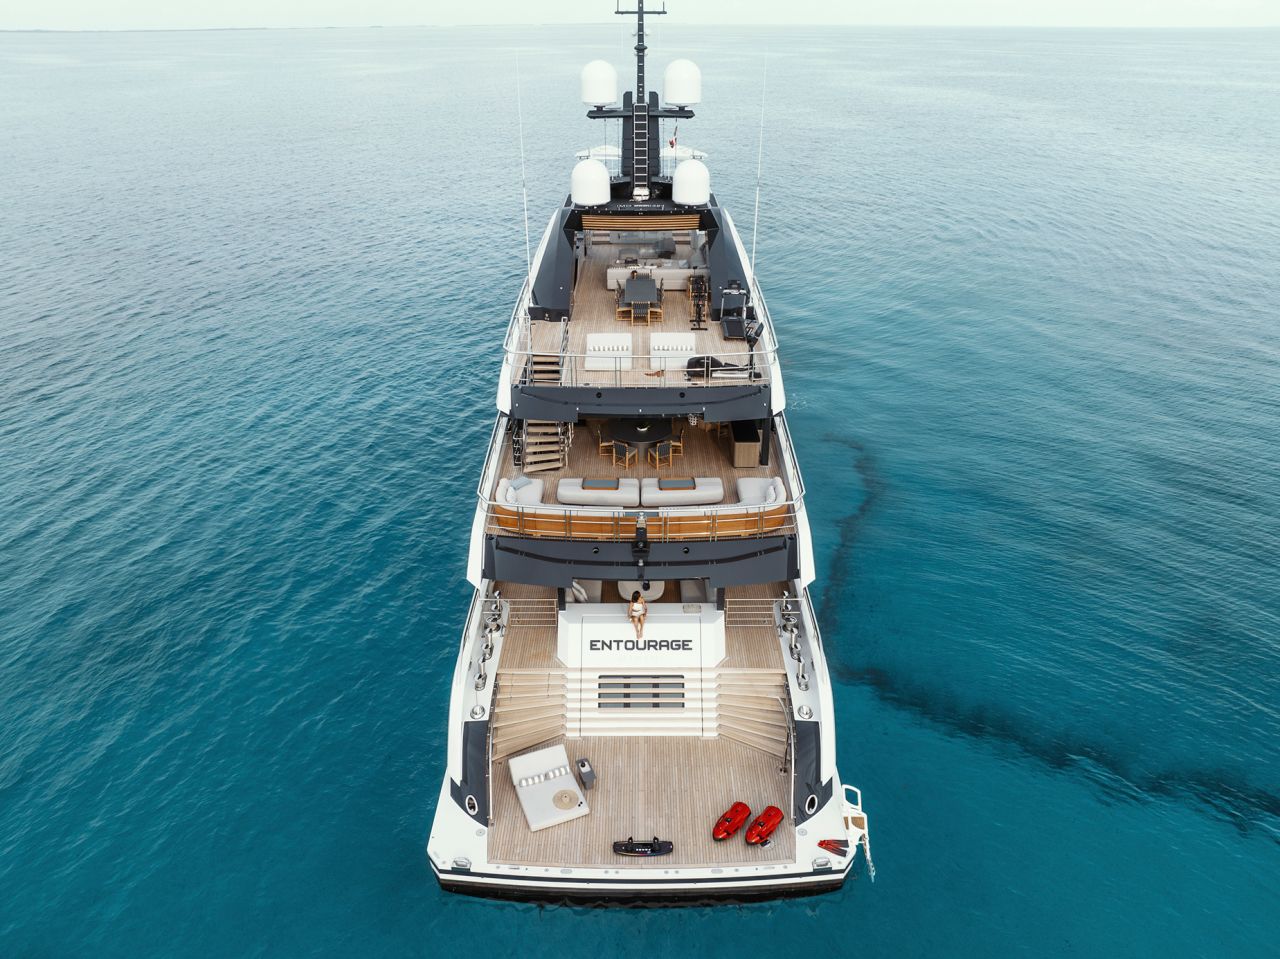 Built by Amels in the Netherlands, Entourage is among the new superyachts on show.